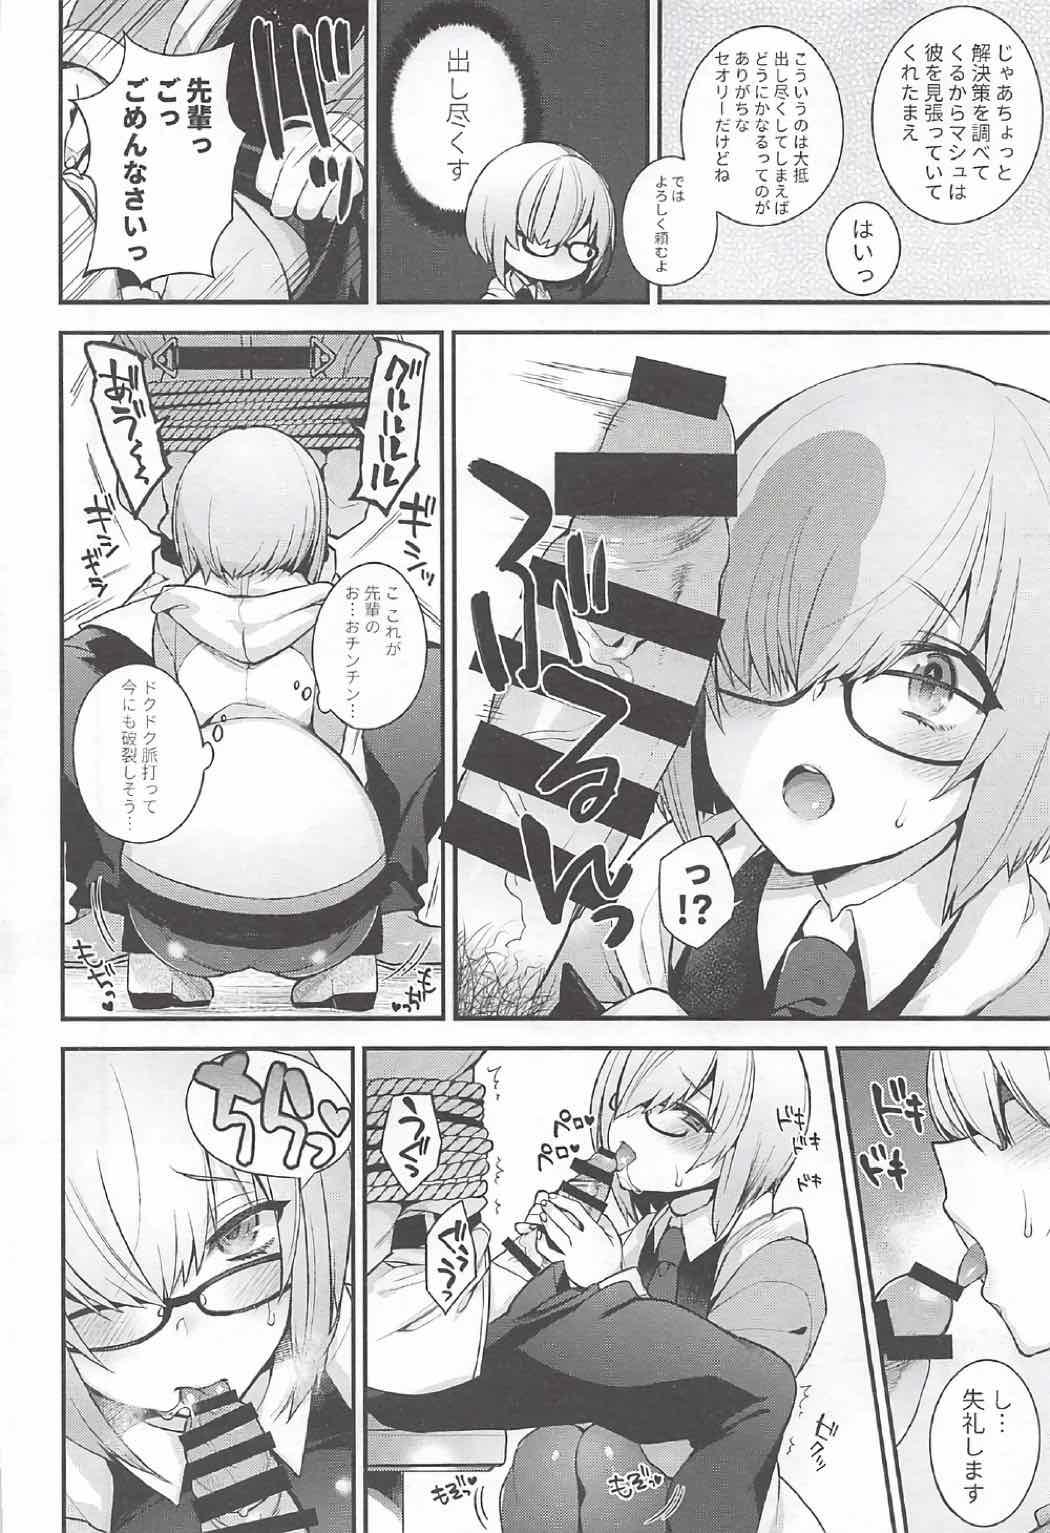 Her Ero/Grand Order - Fate grand order Tinytits - Page 4